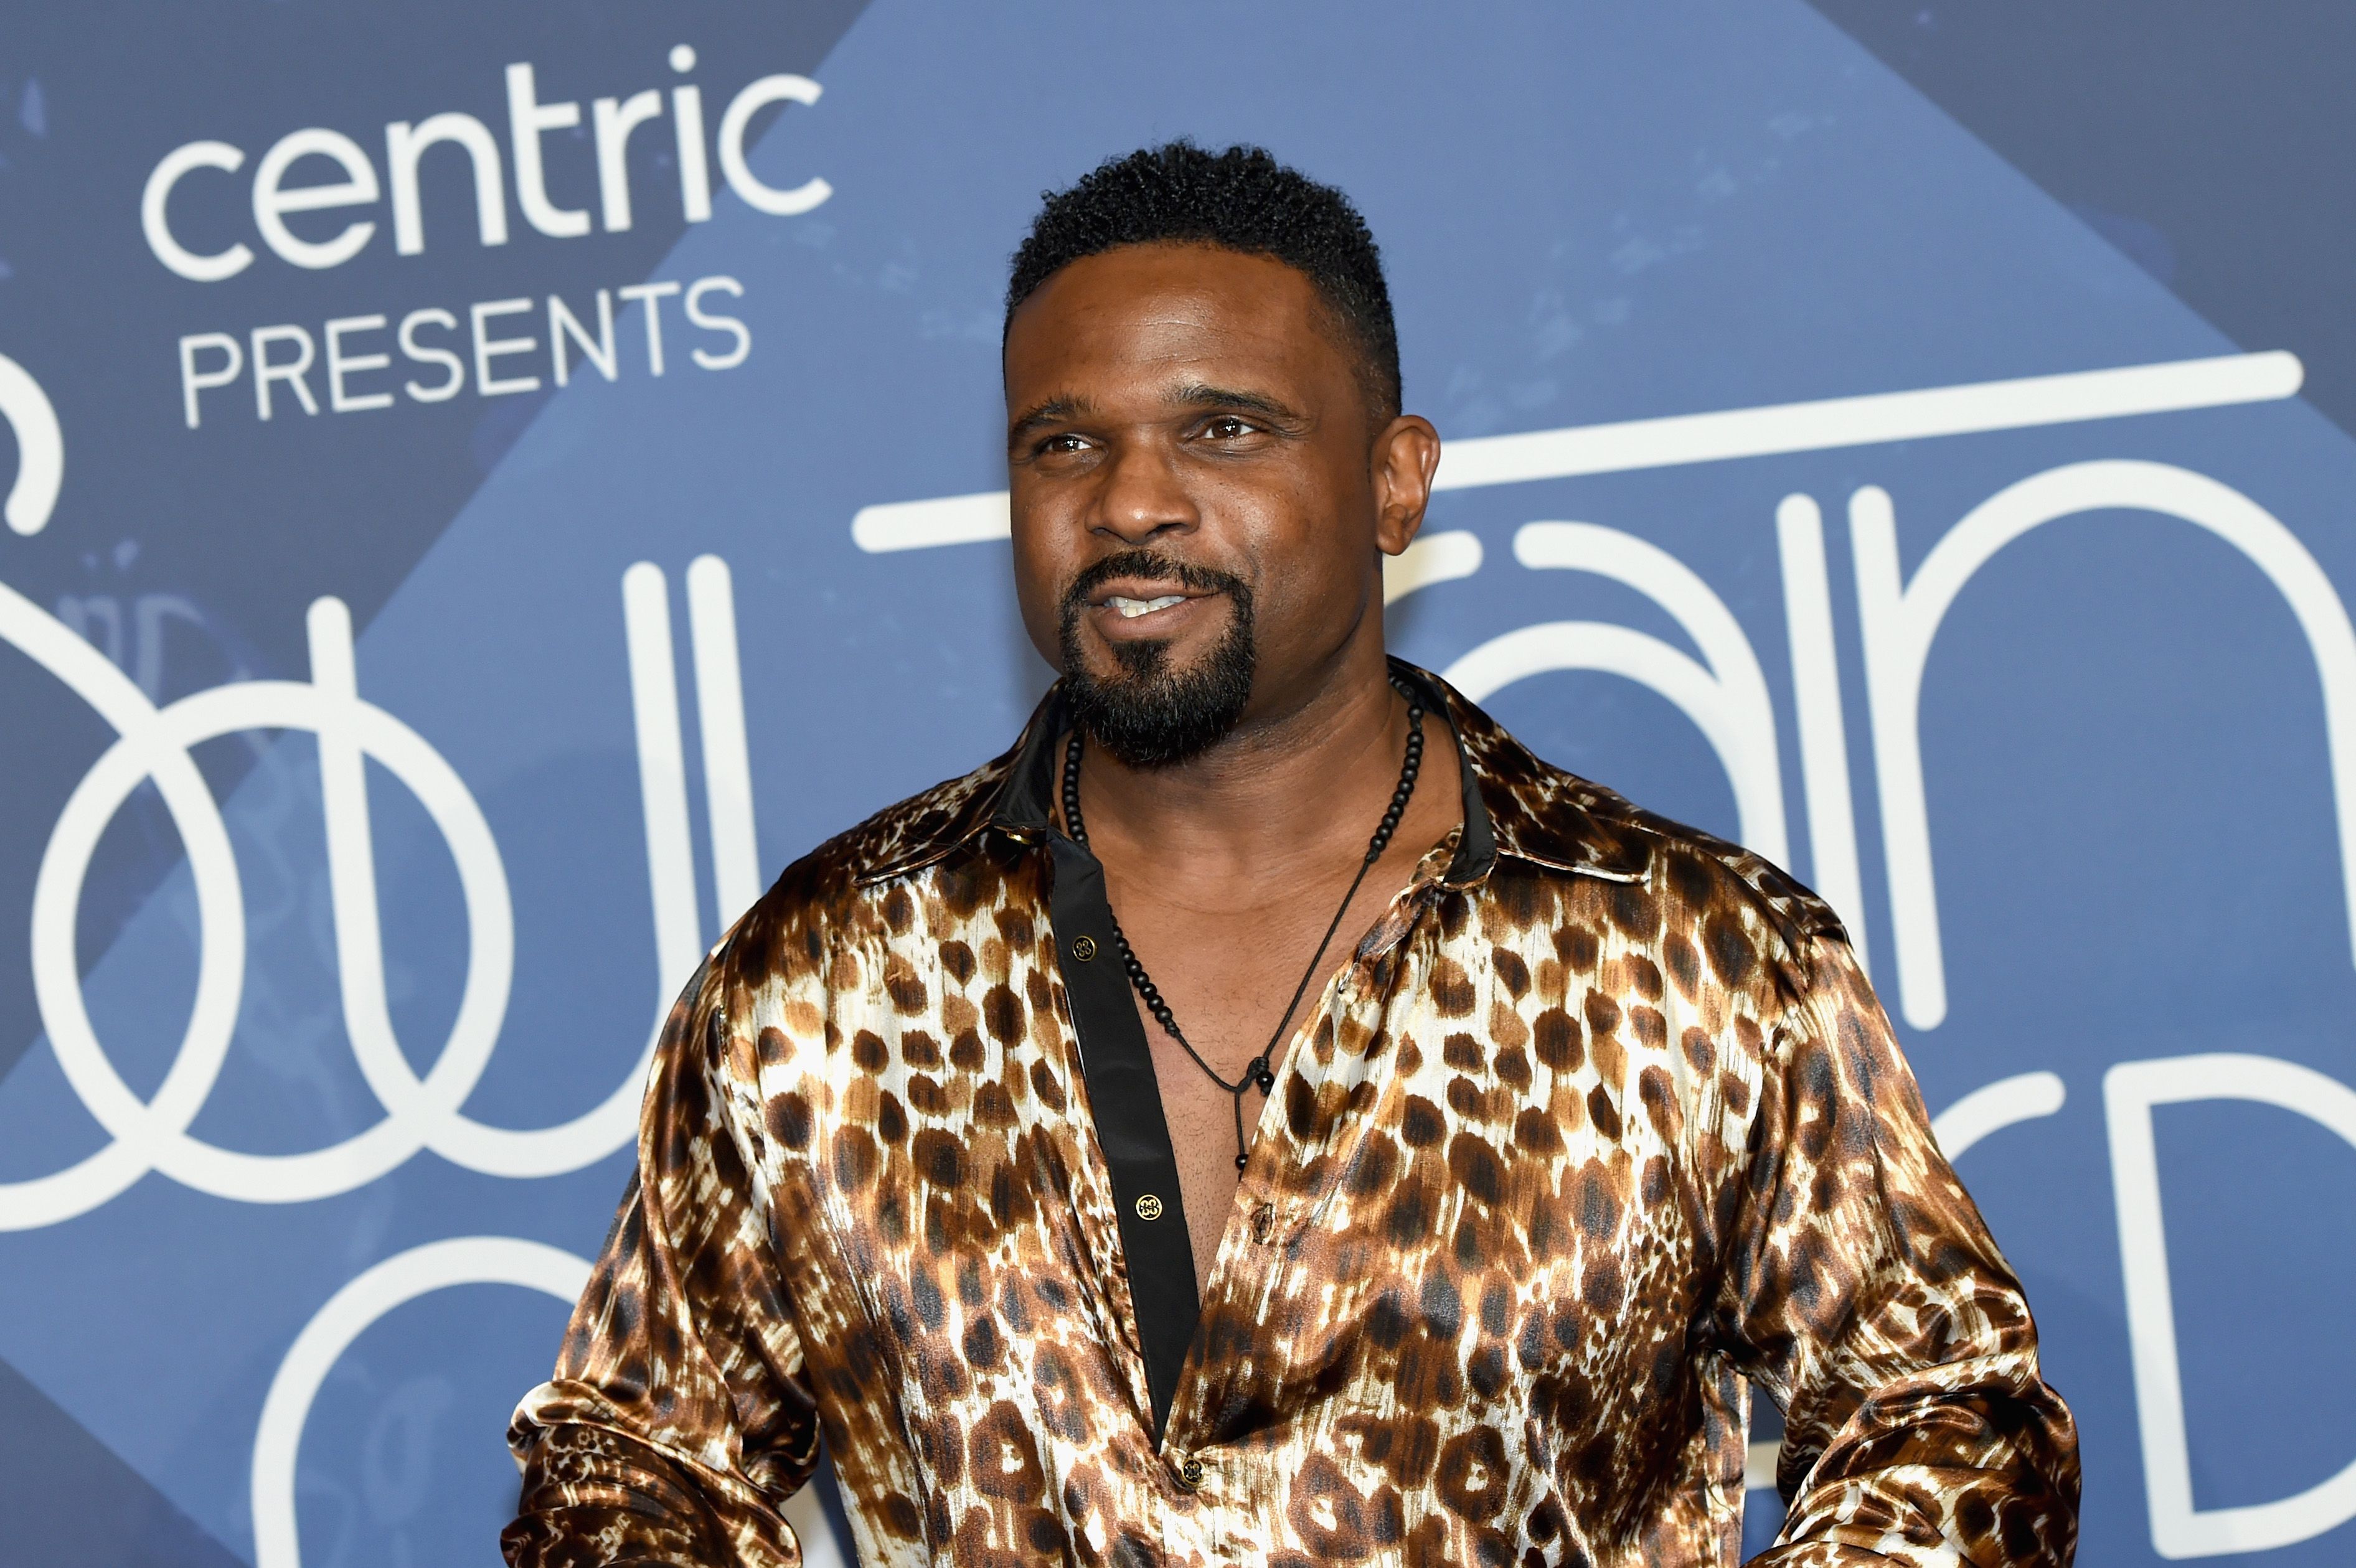 Darius McCrary during the 2016 Soul Train Music Awards at the Orleans Arena on November 6, 2016 in Las Vegas, Nevada. | Source: Getty Images